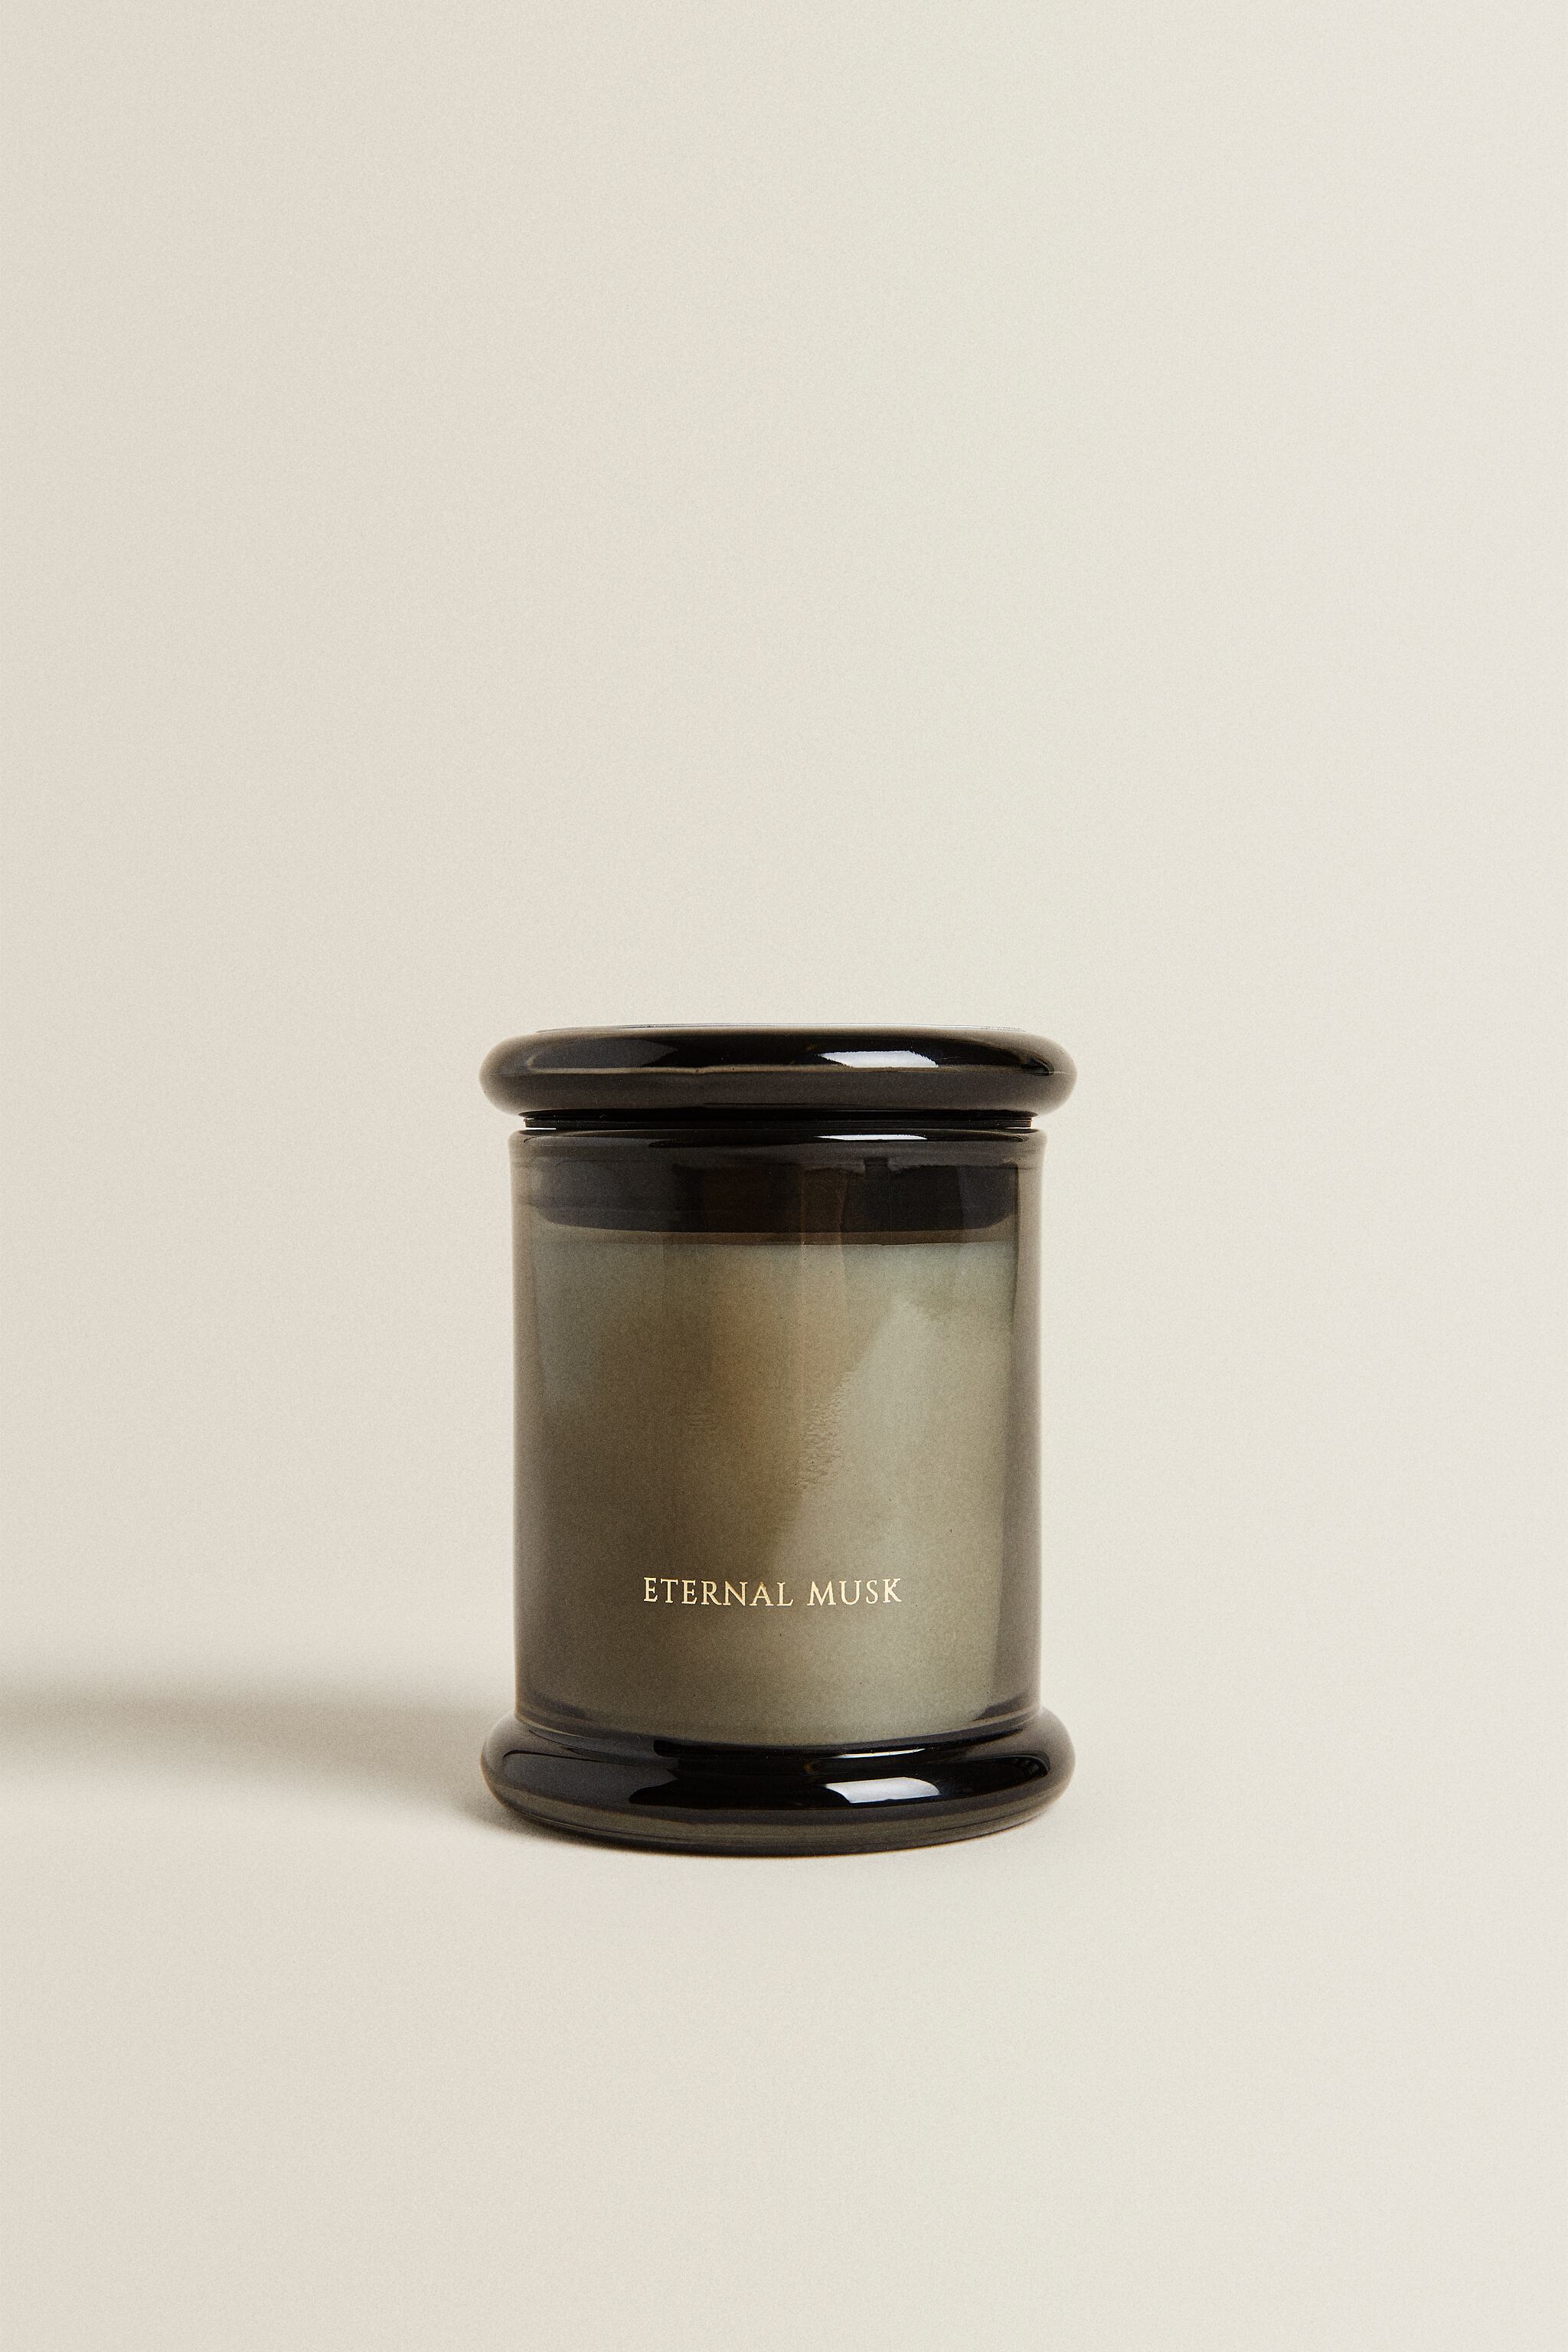 G) ETERNAL MUSK SCENTED CANDLE